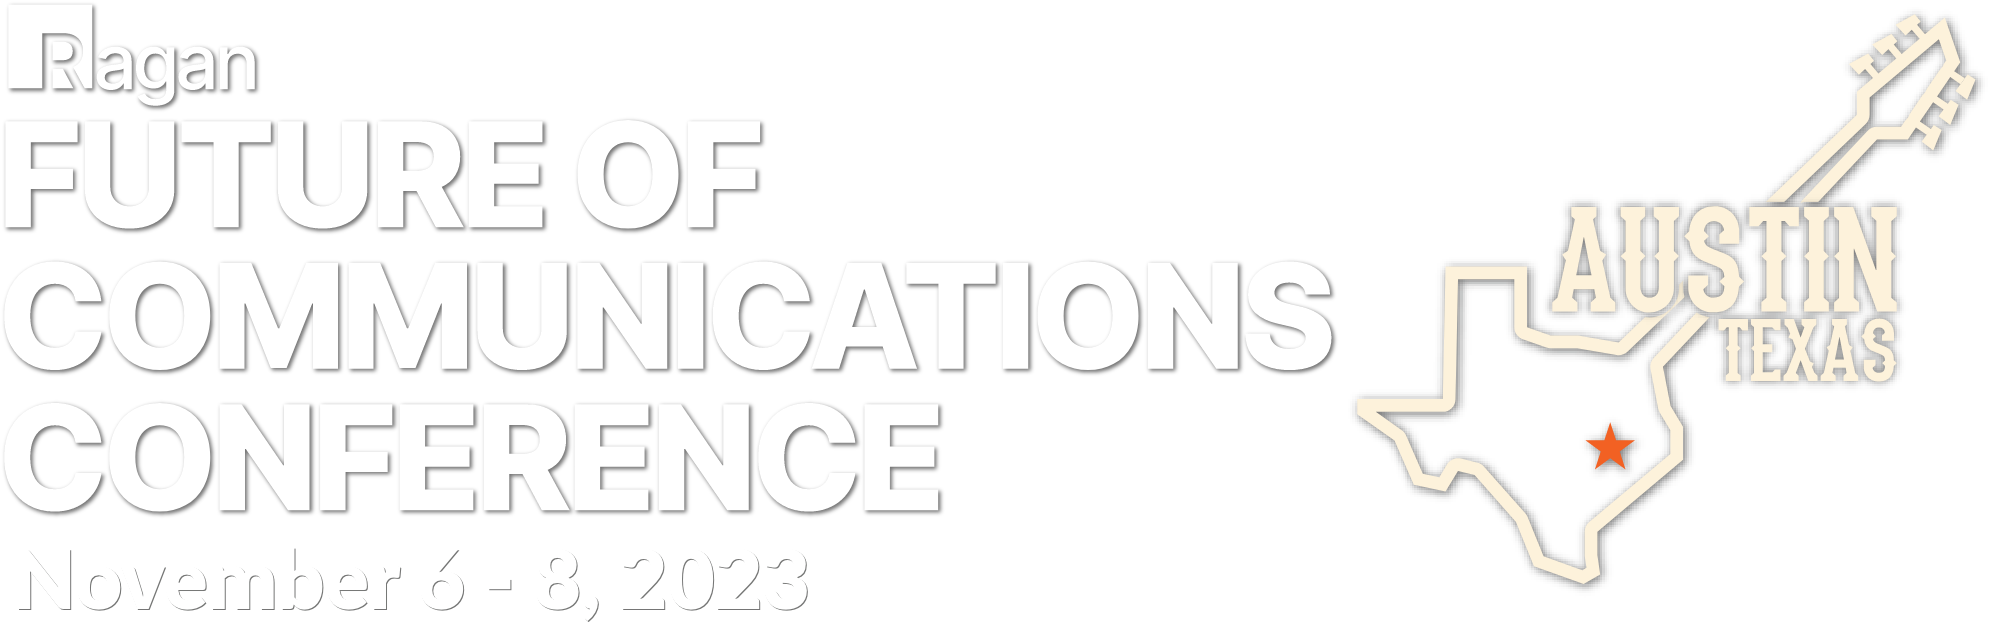 Future of Communications Conference | Nov. 6-8, 2023 | Austin, TX